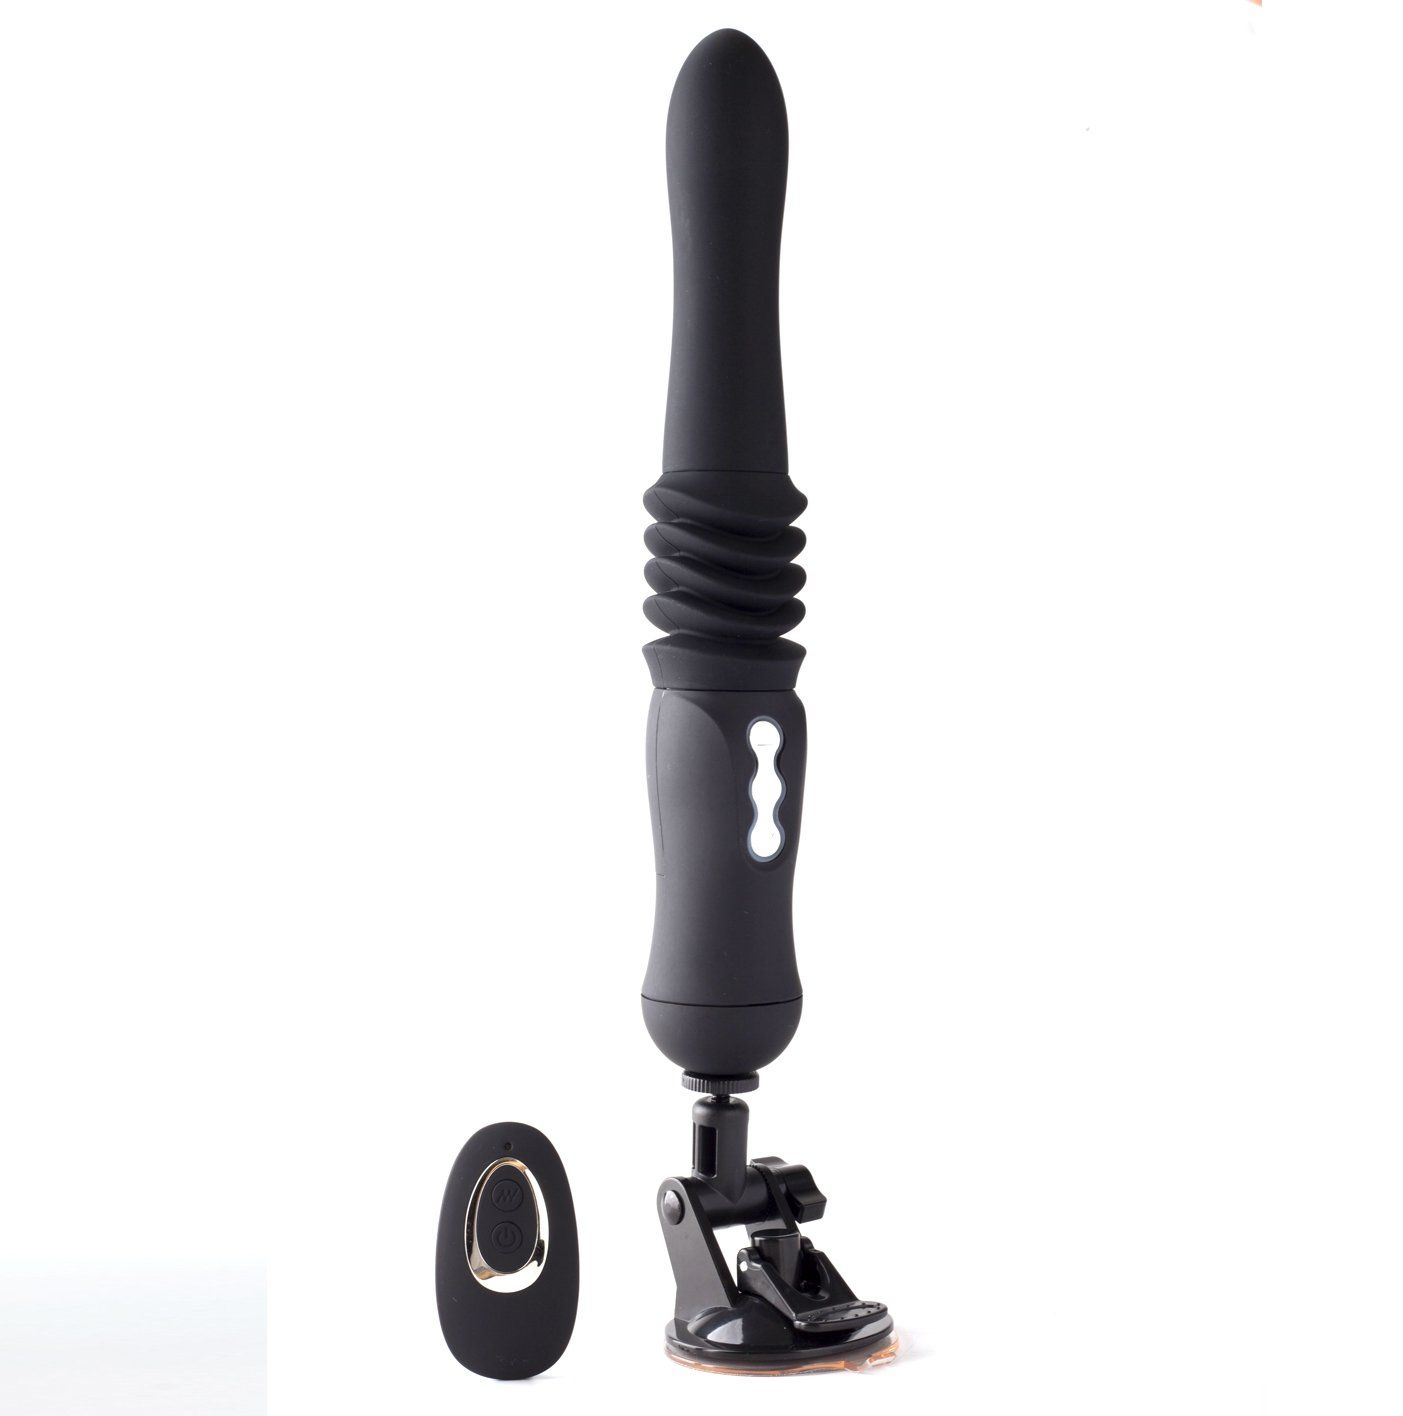 Maia max thrusting vibrator - Product front view  | Flirtybay.com.au